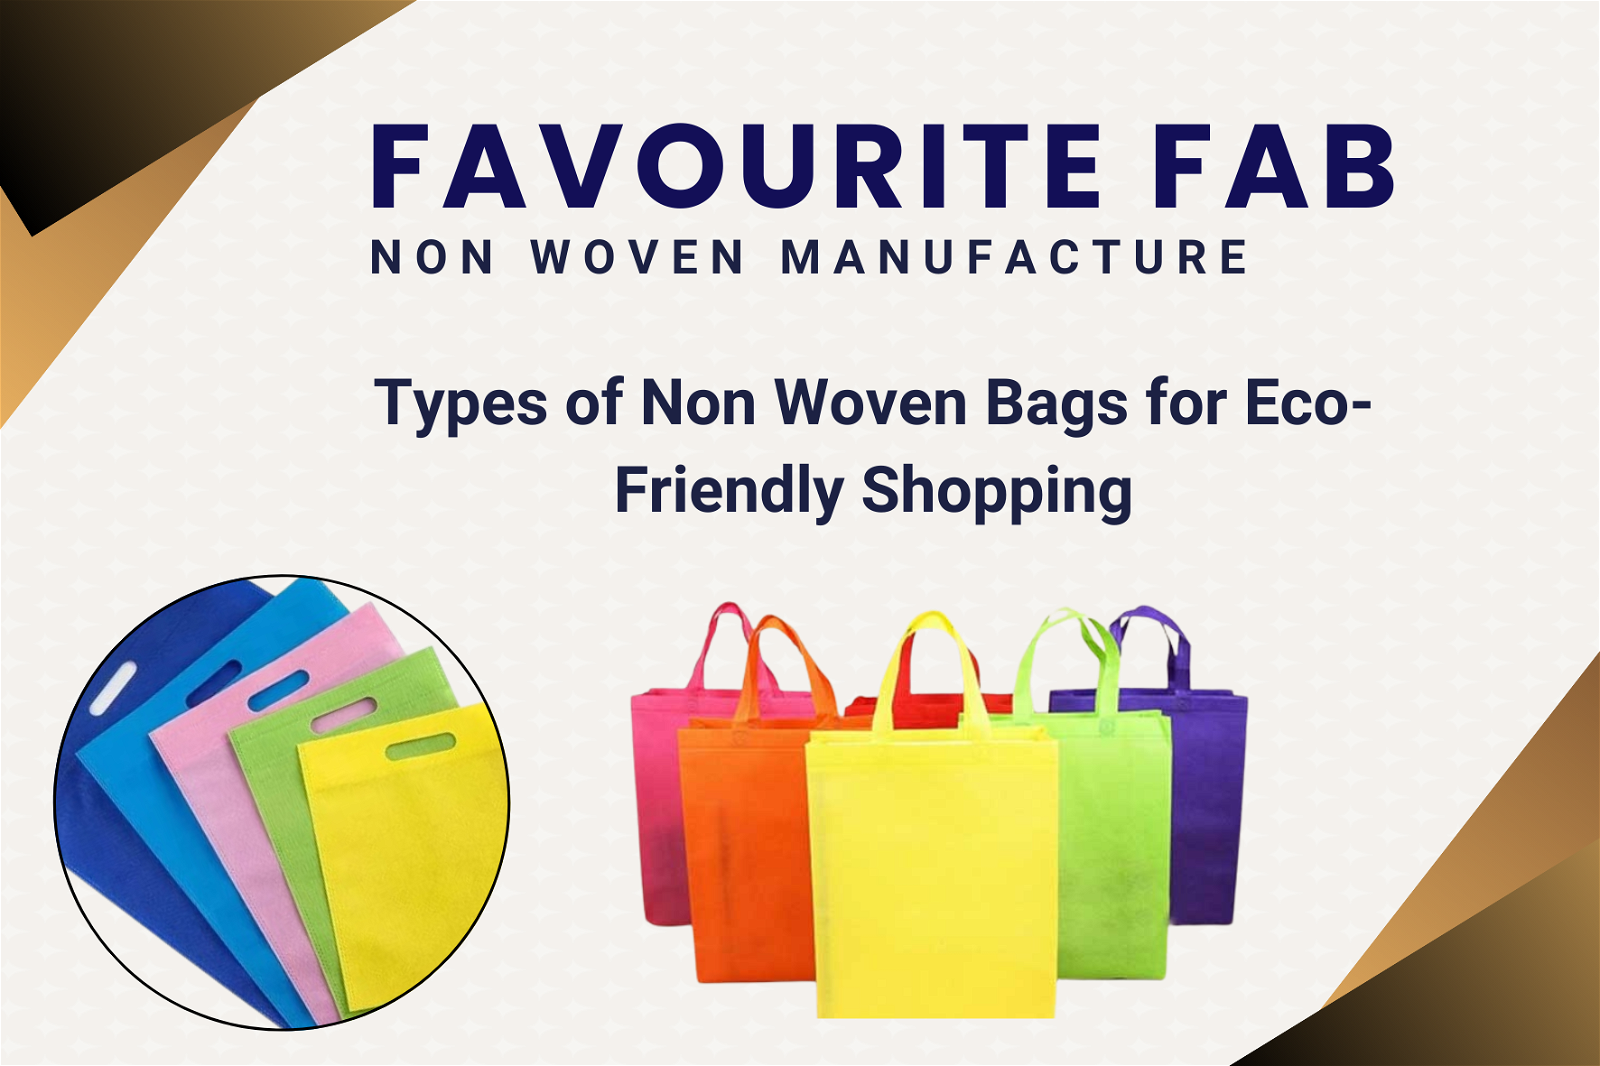 Woven vs Non-Woven Bags - What is the Difference?